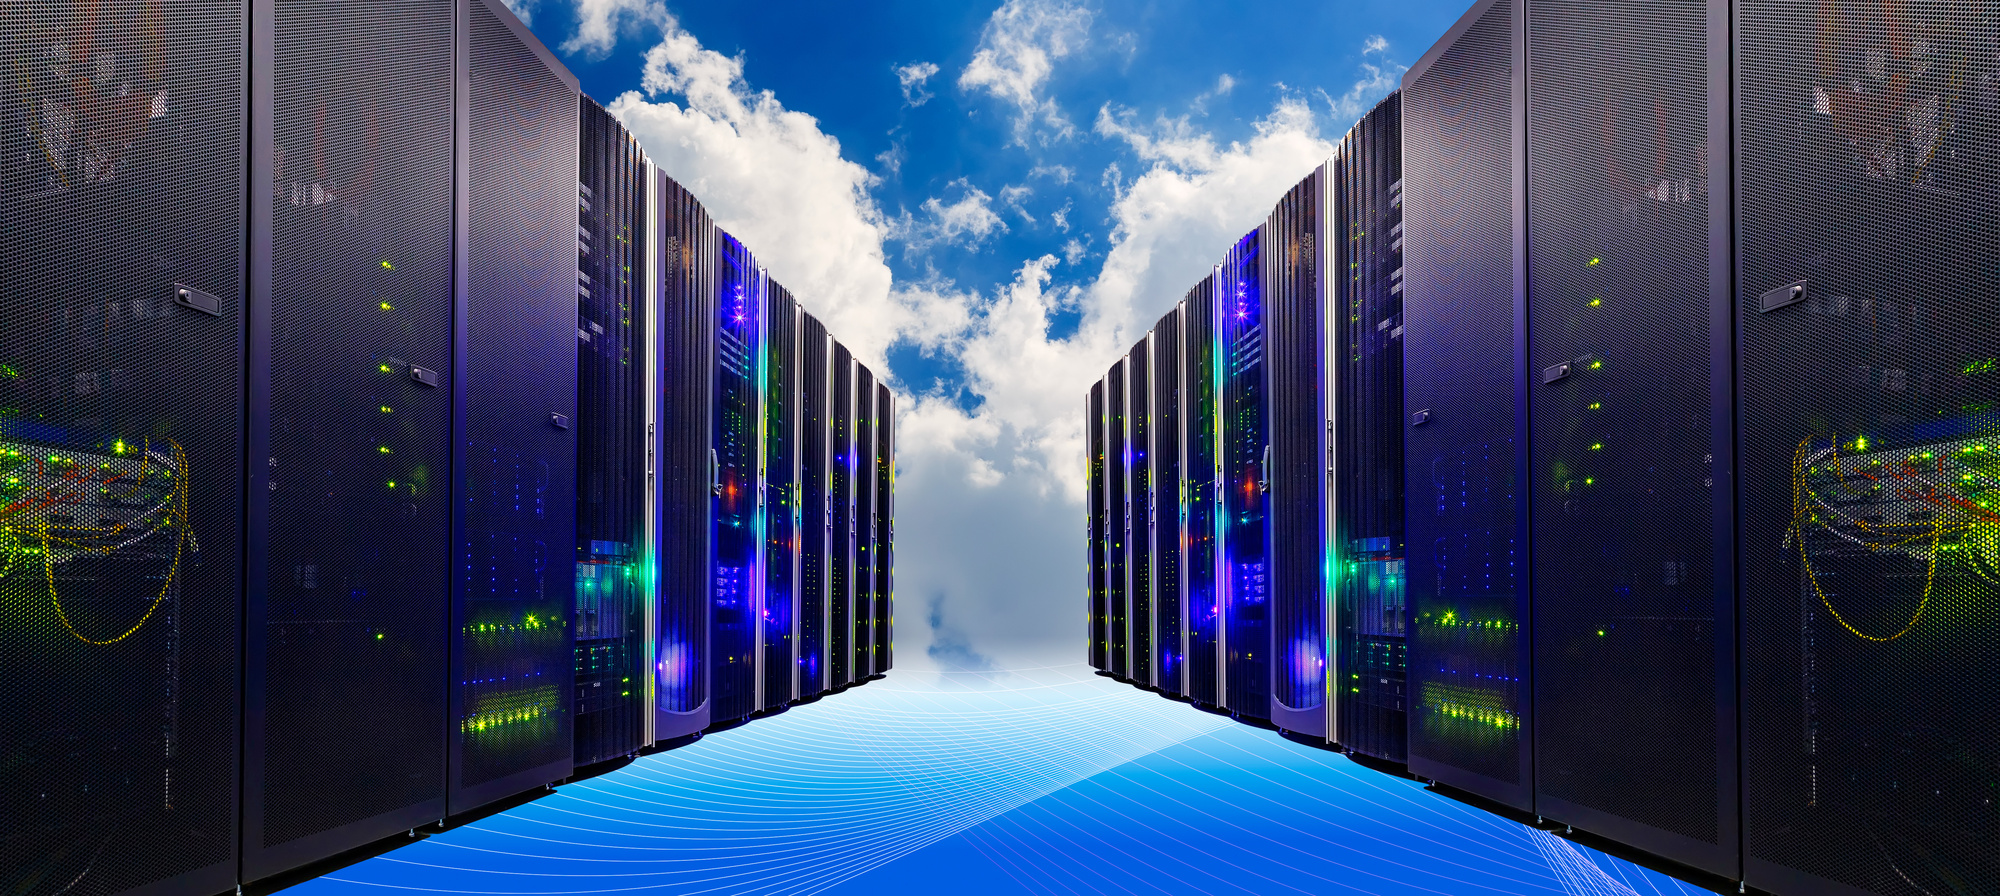 How to Pick the Best Cloud Hosting Providers - FindABusinessThat.com